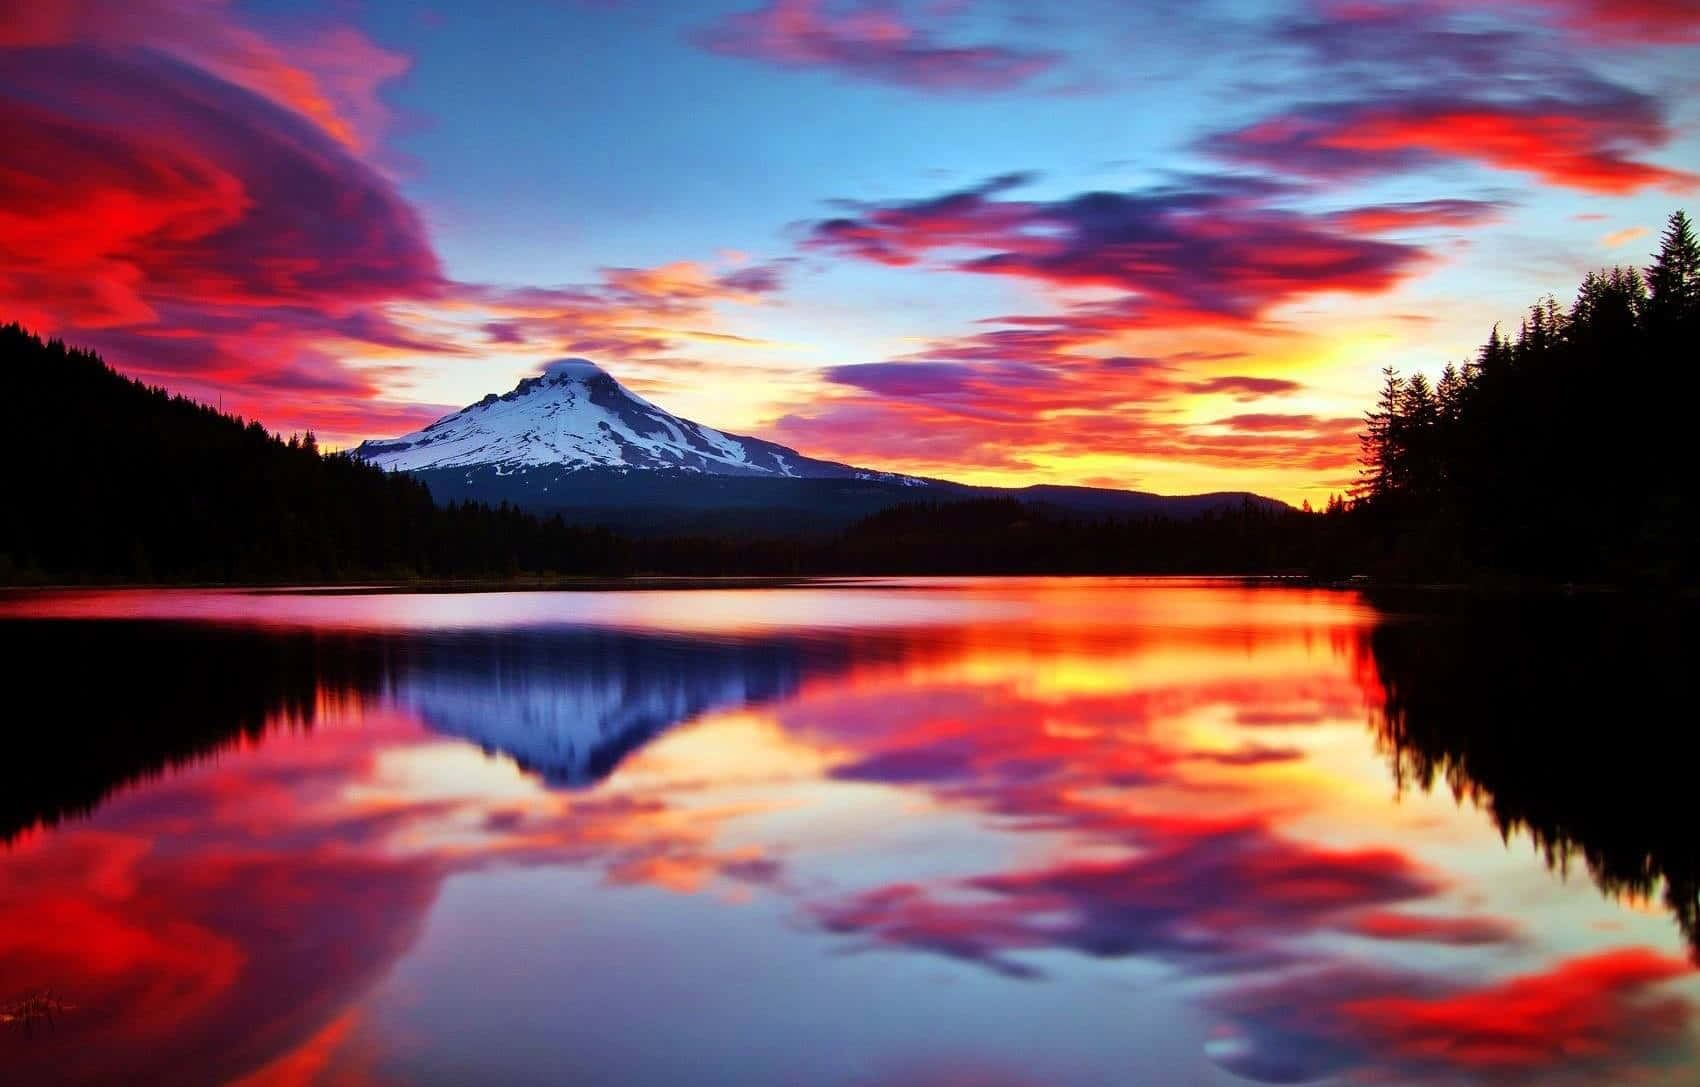 A Mountain Is Reflected In A Lake At Sunset